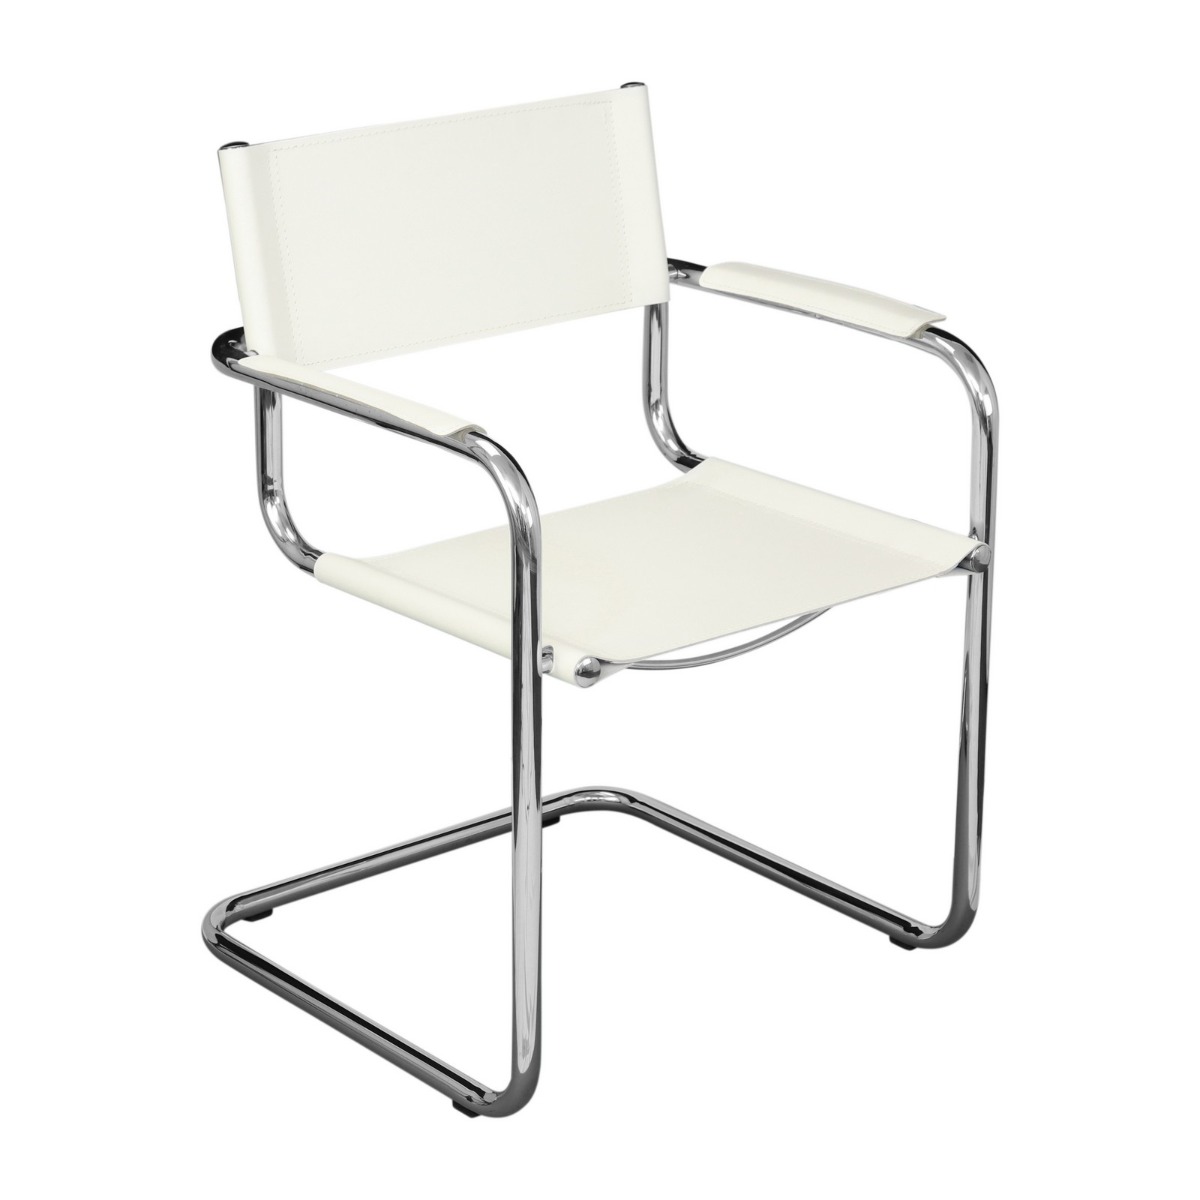 Breuer Chair Company Mart Stam Italia Cantilever Armchair Arm Chair in Chrome and White Faux Leather